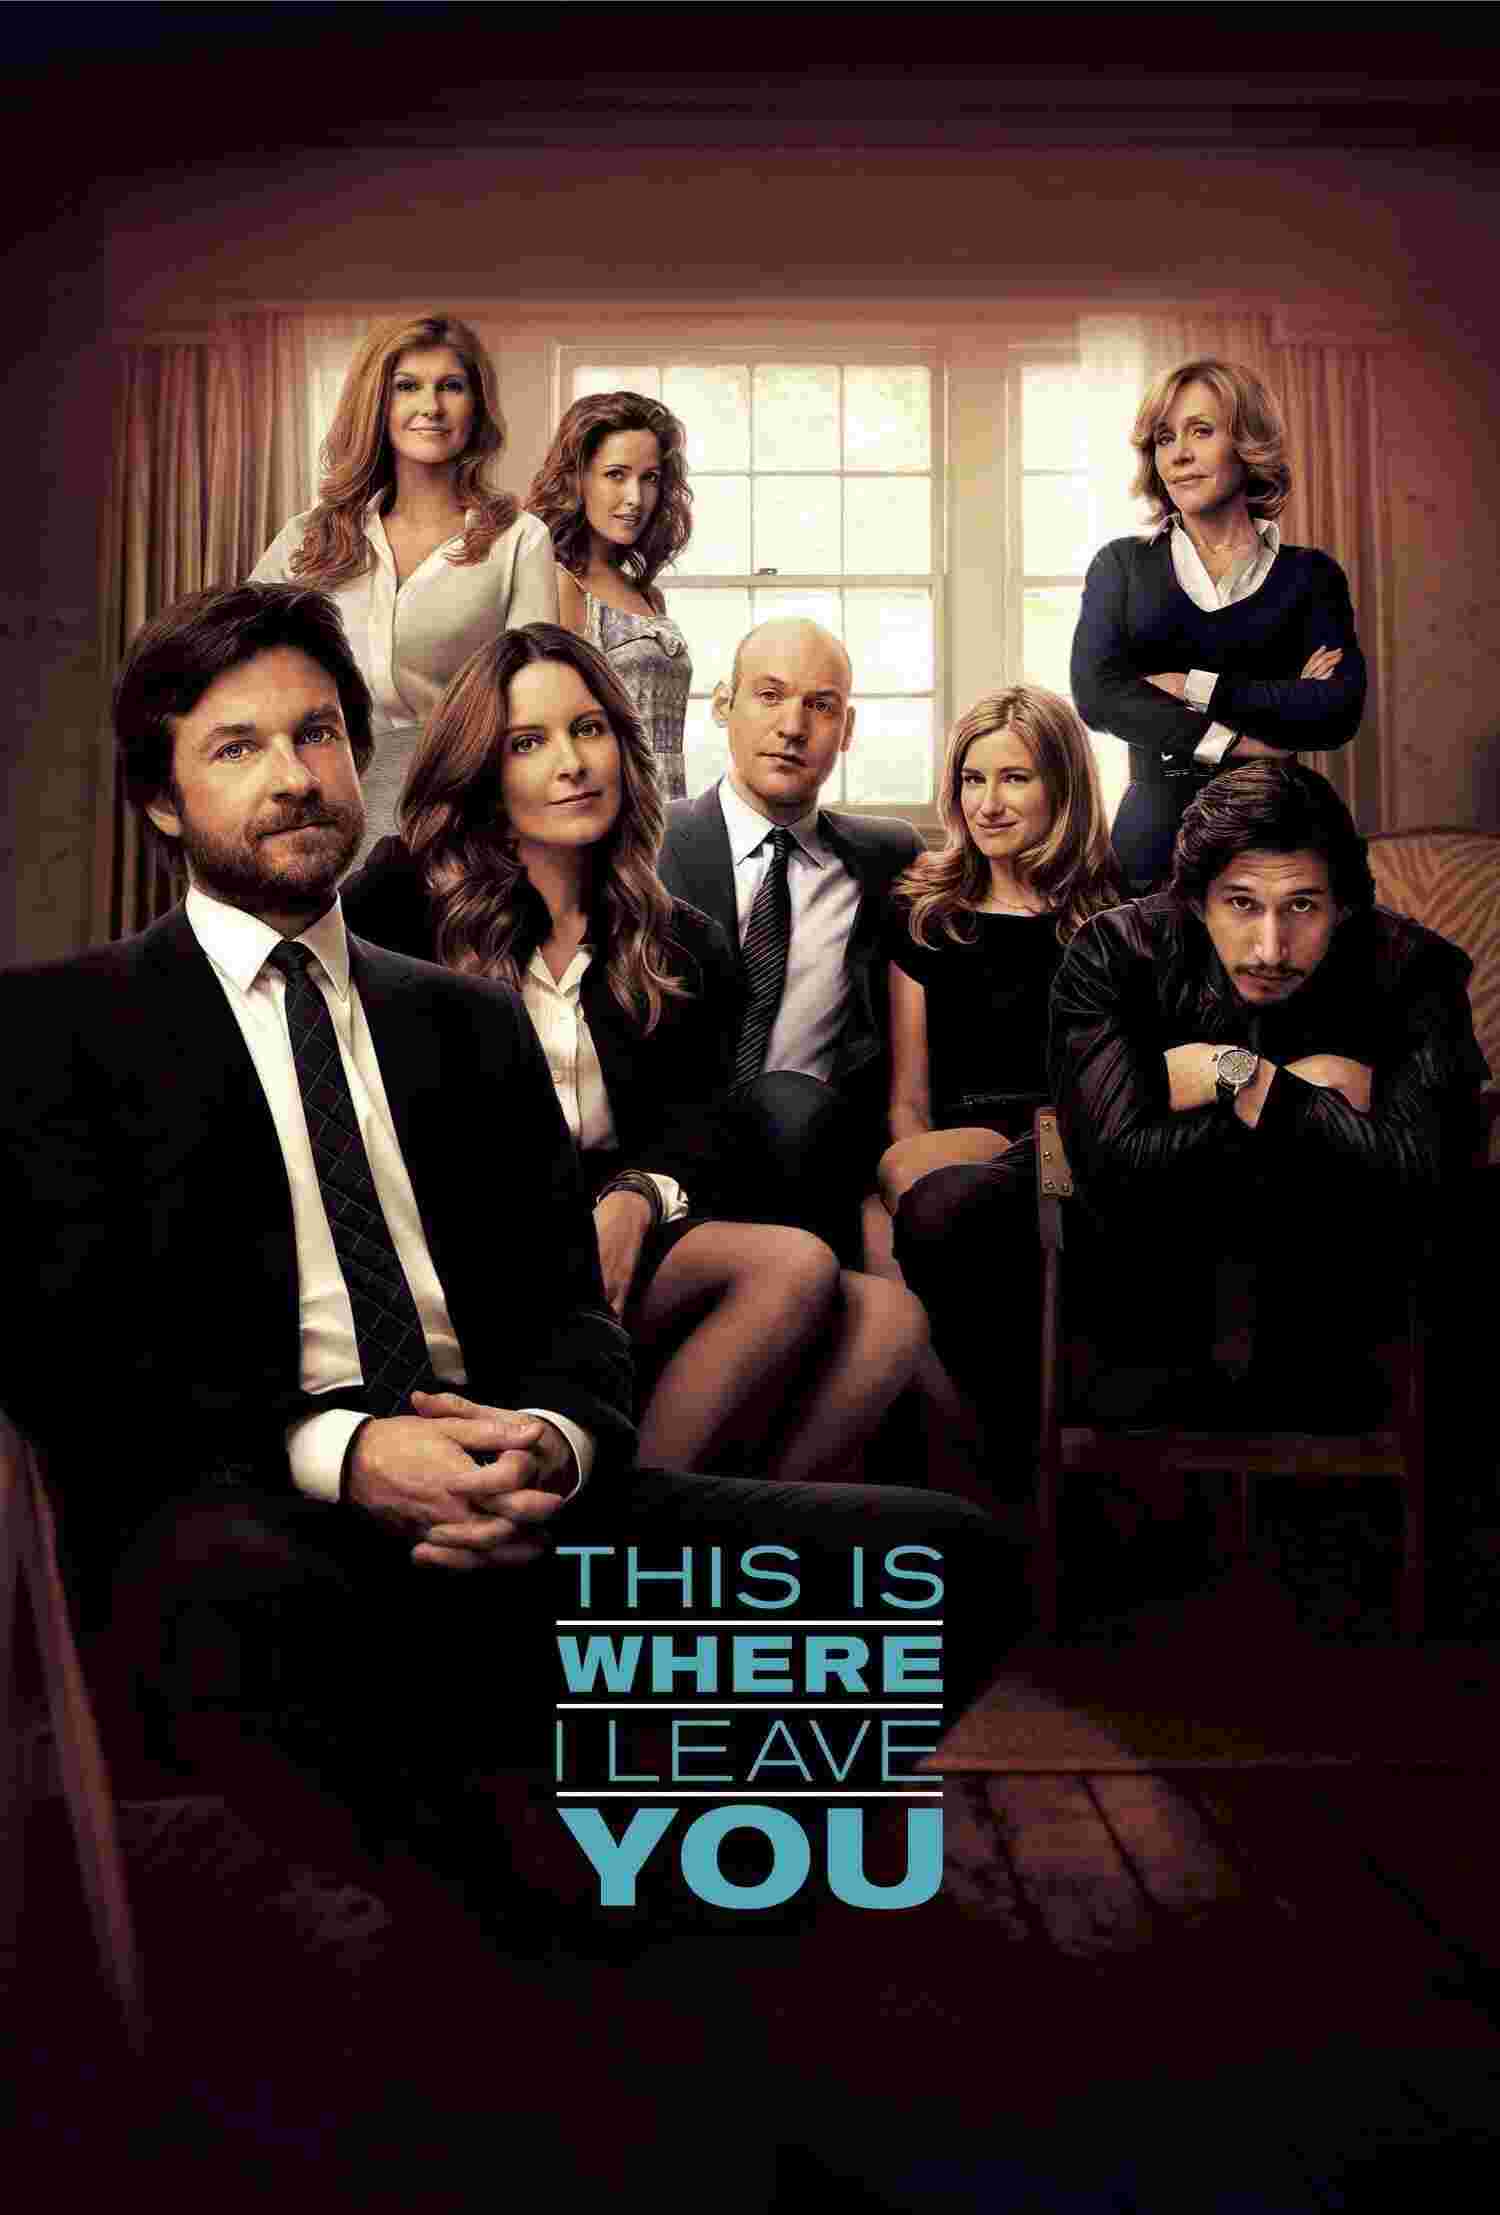 This Is Where I Leave You (2014) Jason Bateman